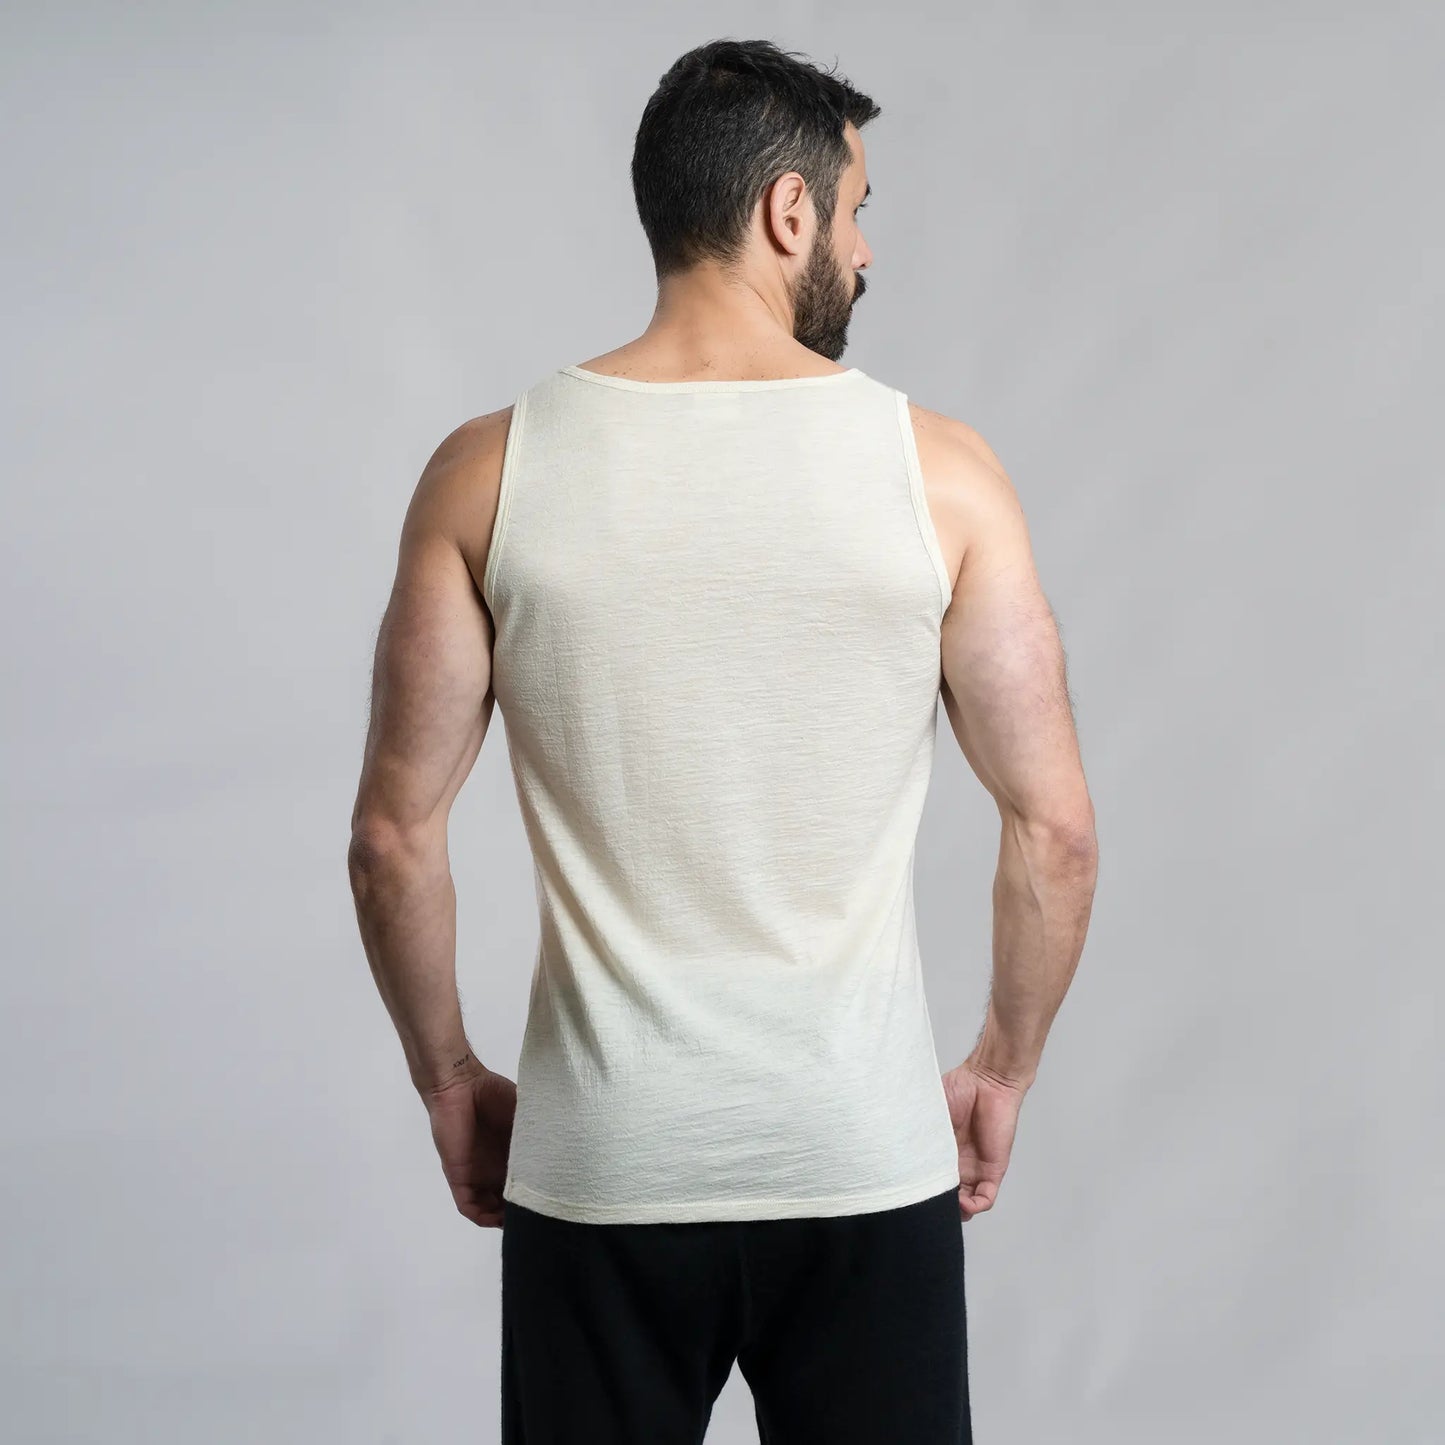 mens all purpose tank top ultralight color Natural White